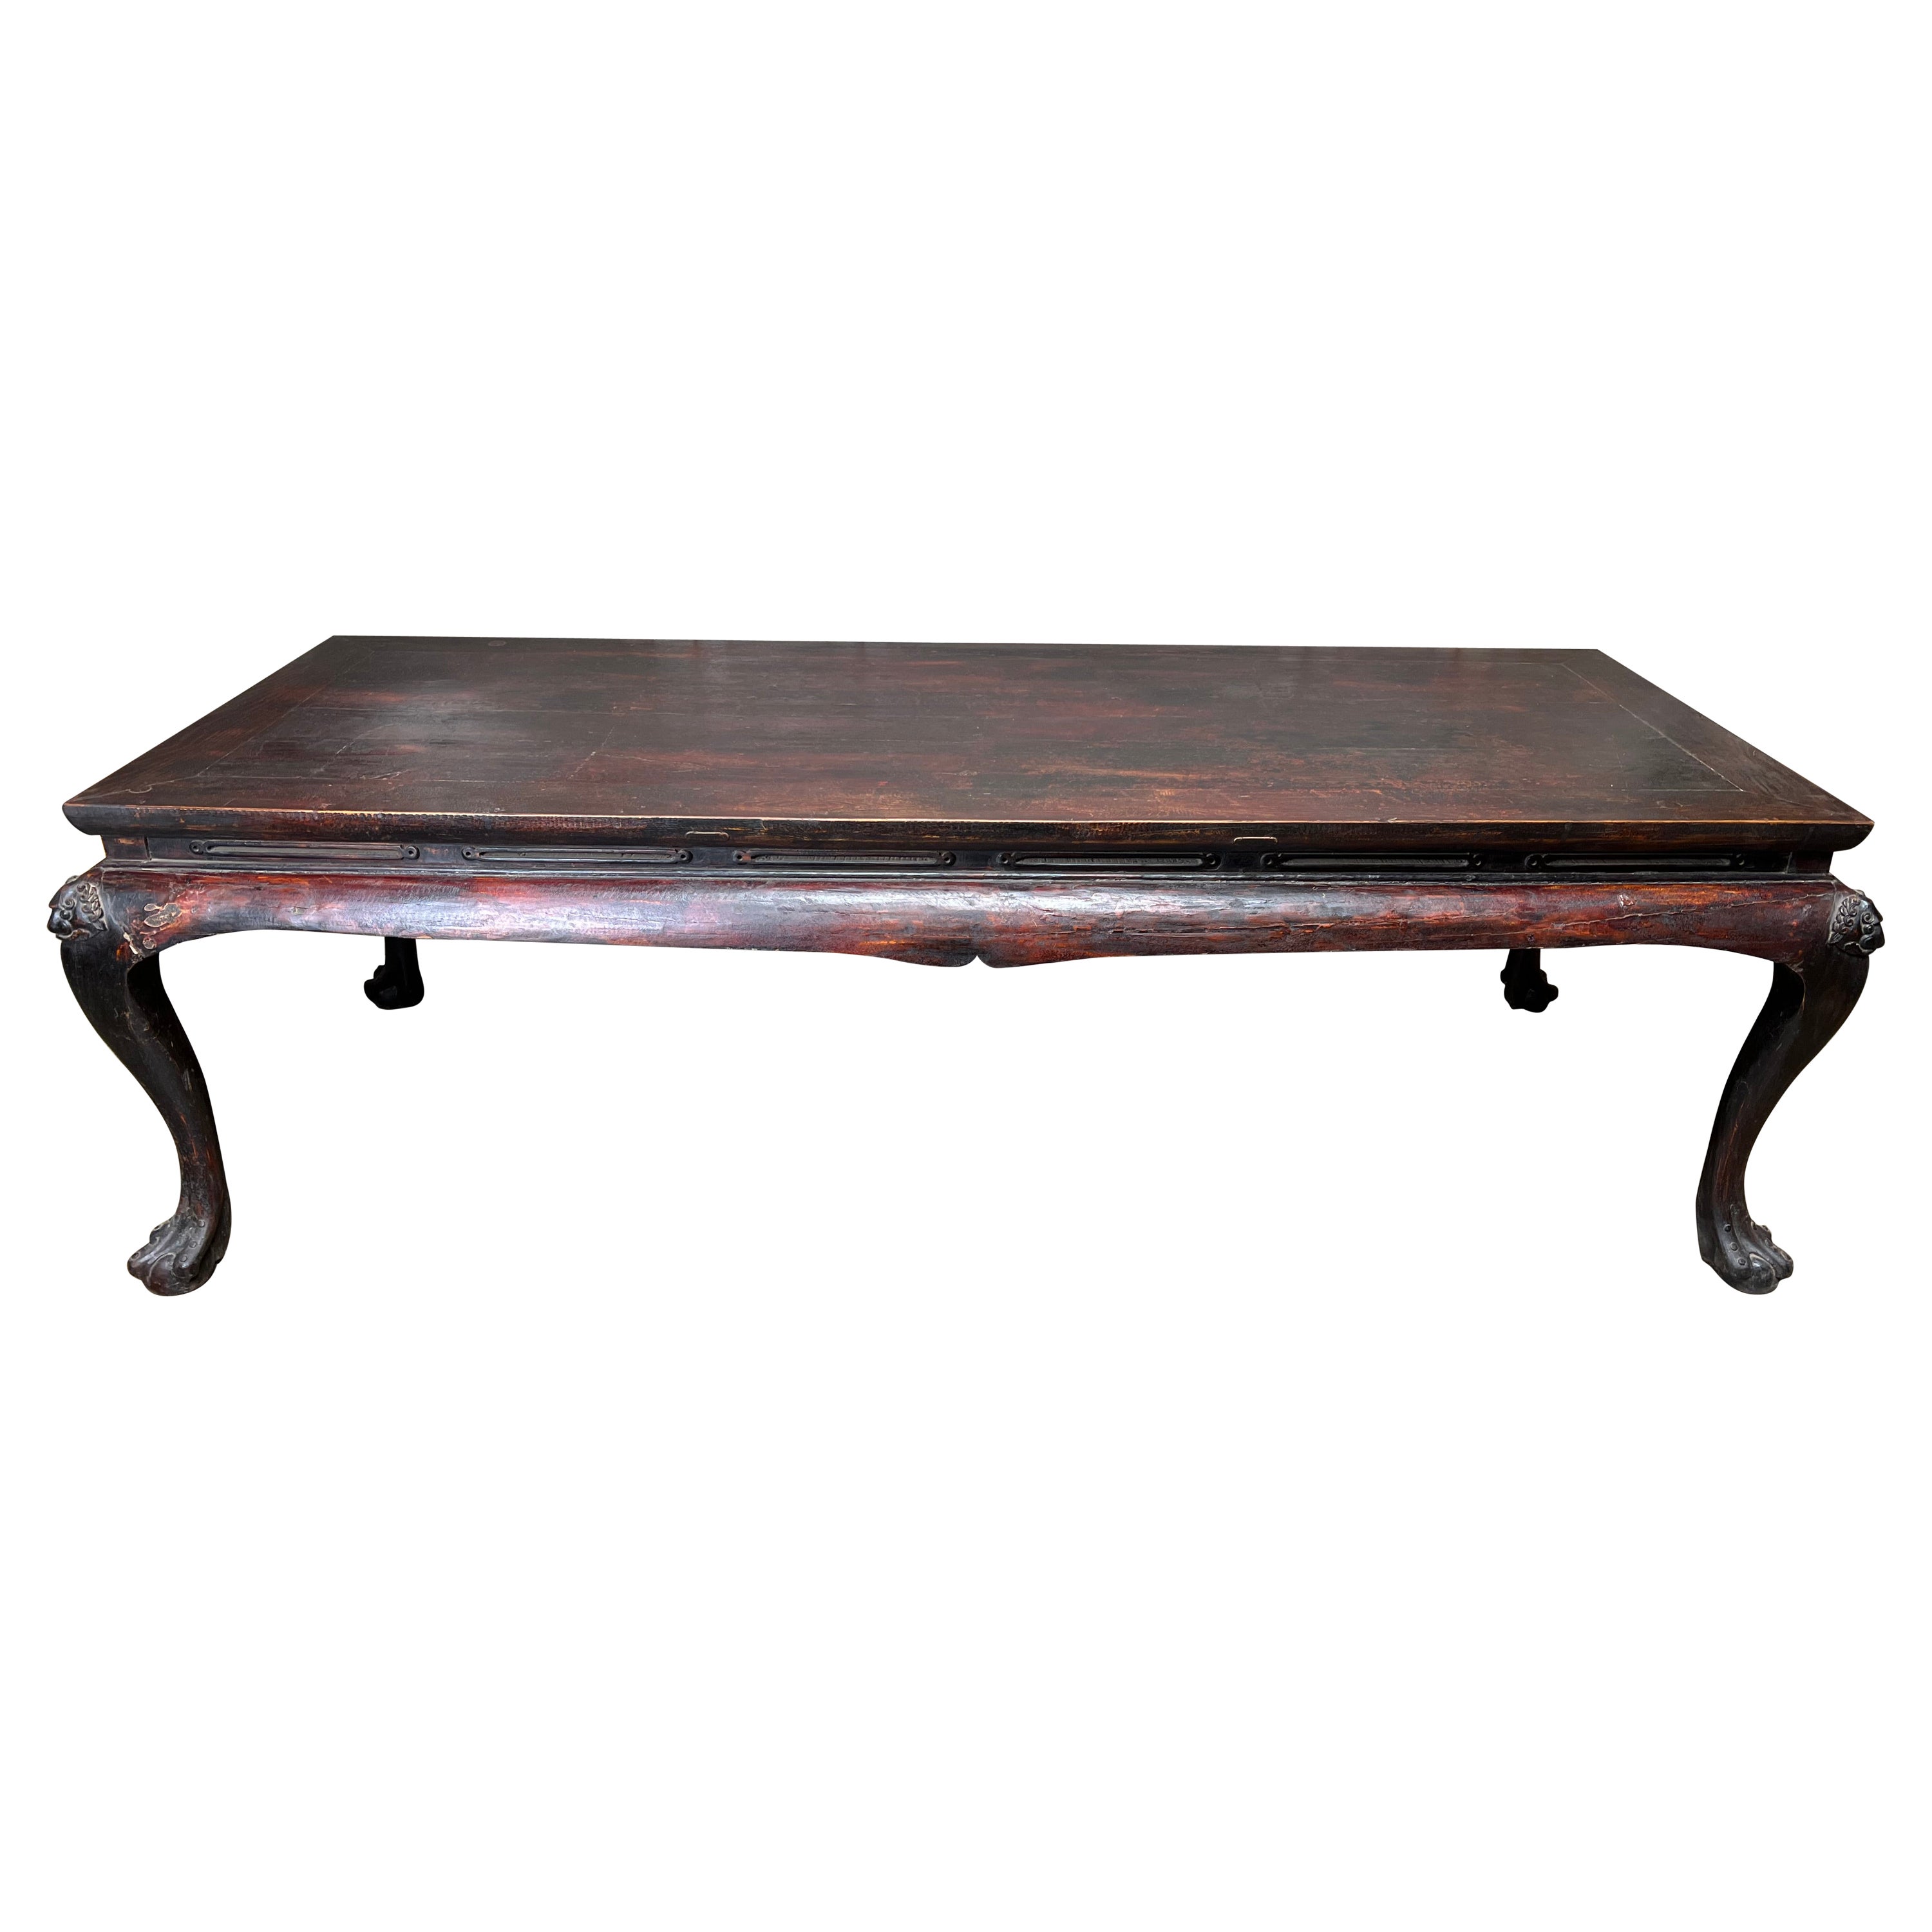 Large 19th Century Elmwood Table with an Old Lacquer Finish For Sale